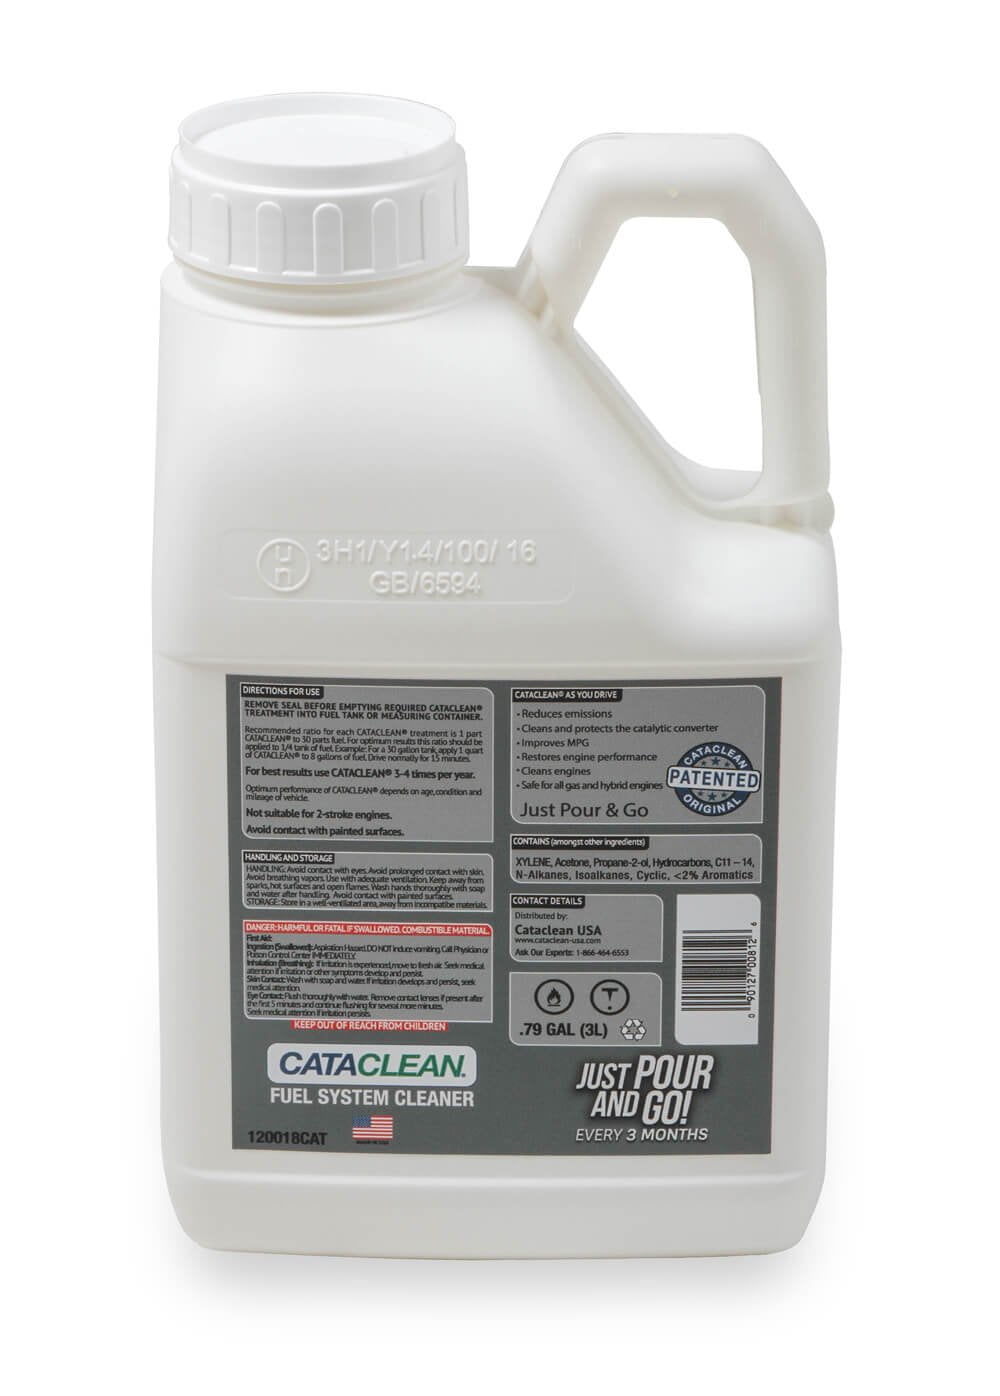 CATACLEAN EXHAUST & FUEL SYSTEM CLEANER. Full product review on my You, Car Cleaner